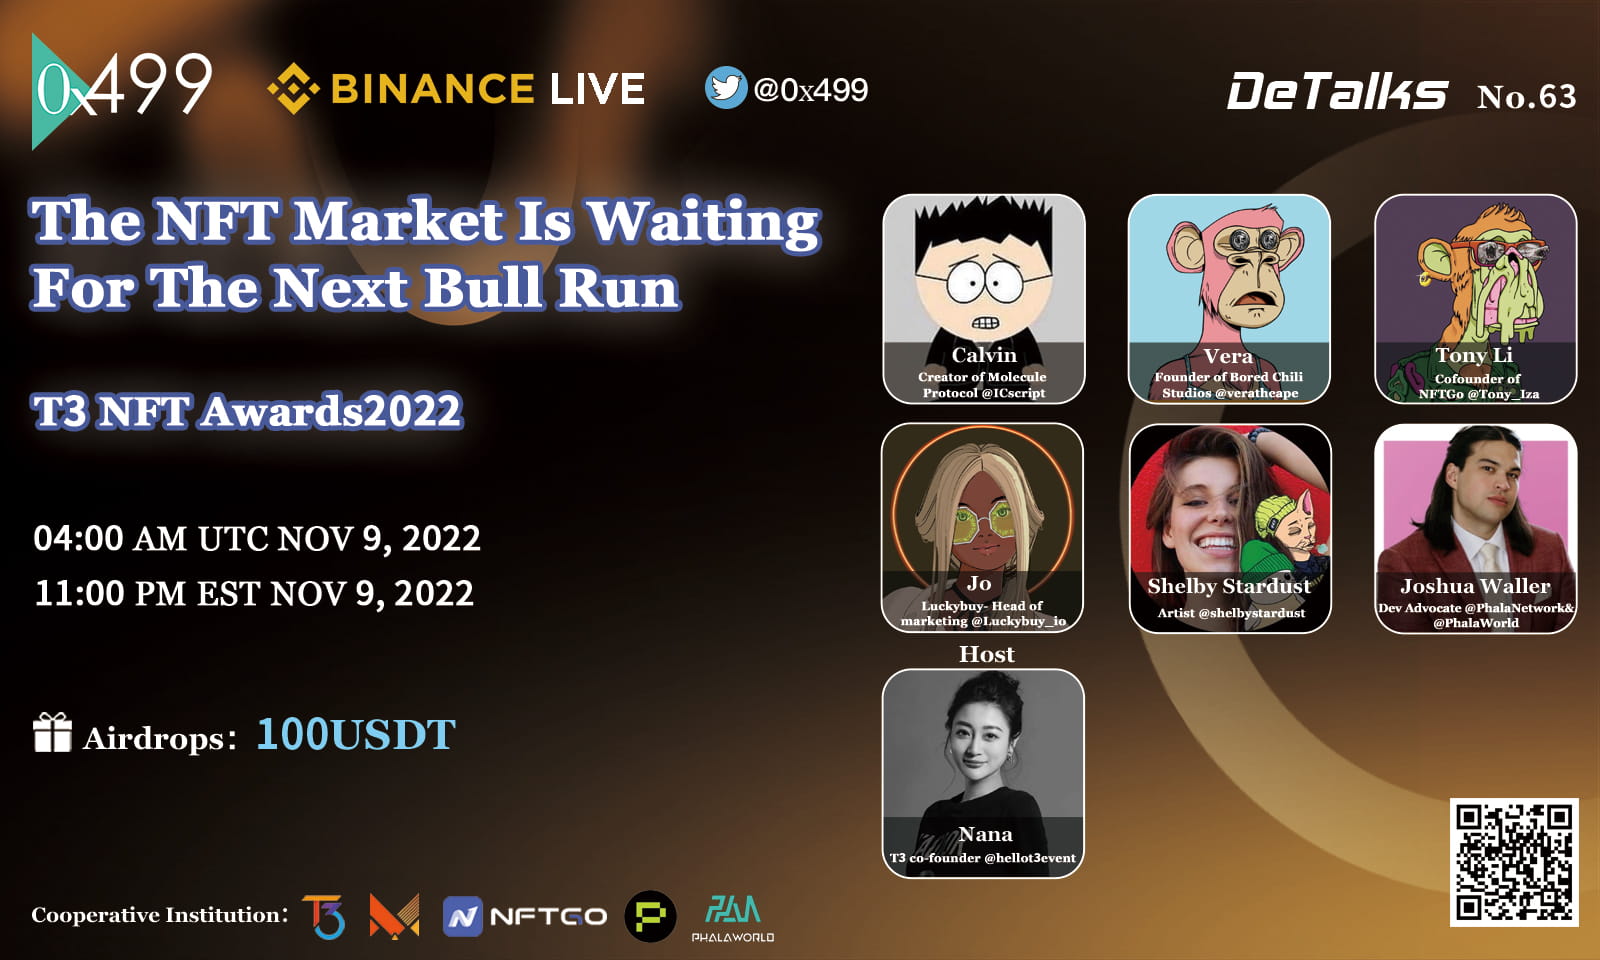 0x499: T3 NFT Awards2022-The NFT Market Is Waiting For The Next Bull Run